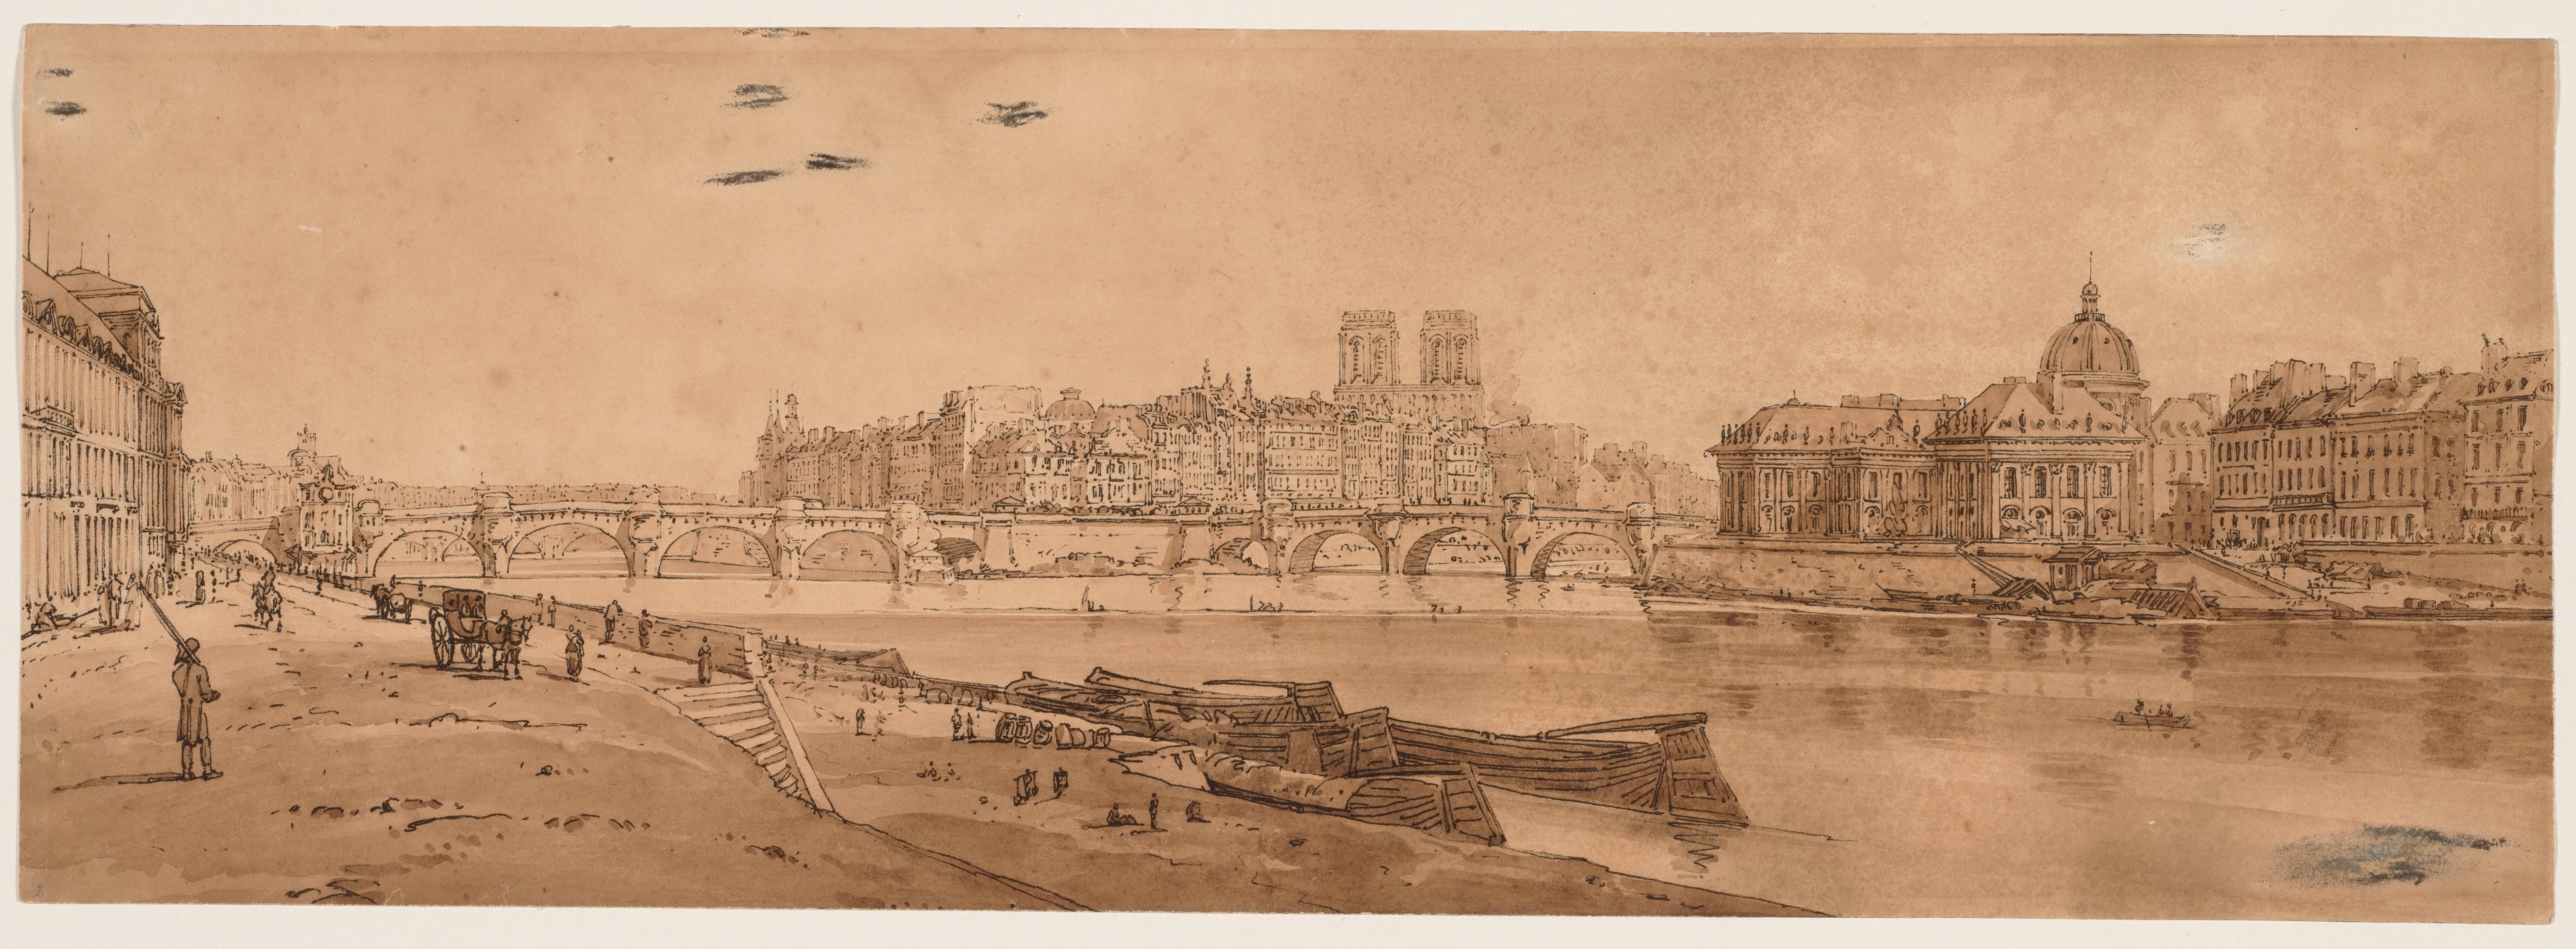 A Selection of Twenty of the Most Picturesque Views in Paris:  View of Pont Neuf, part of the Louvre, Notre Dame, and the College of Four Nations